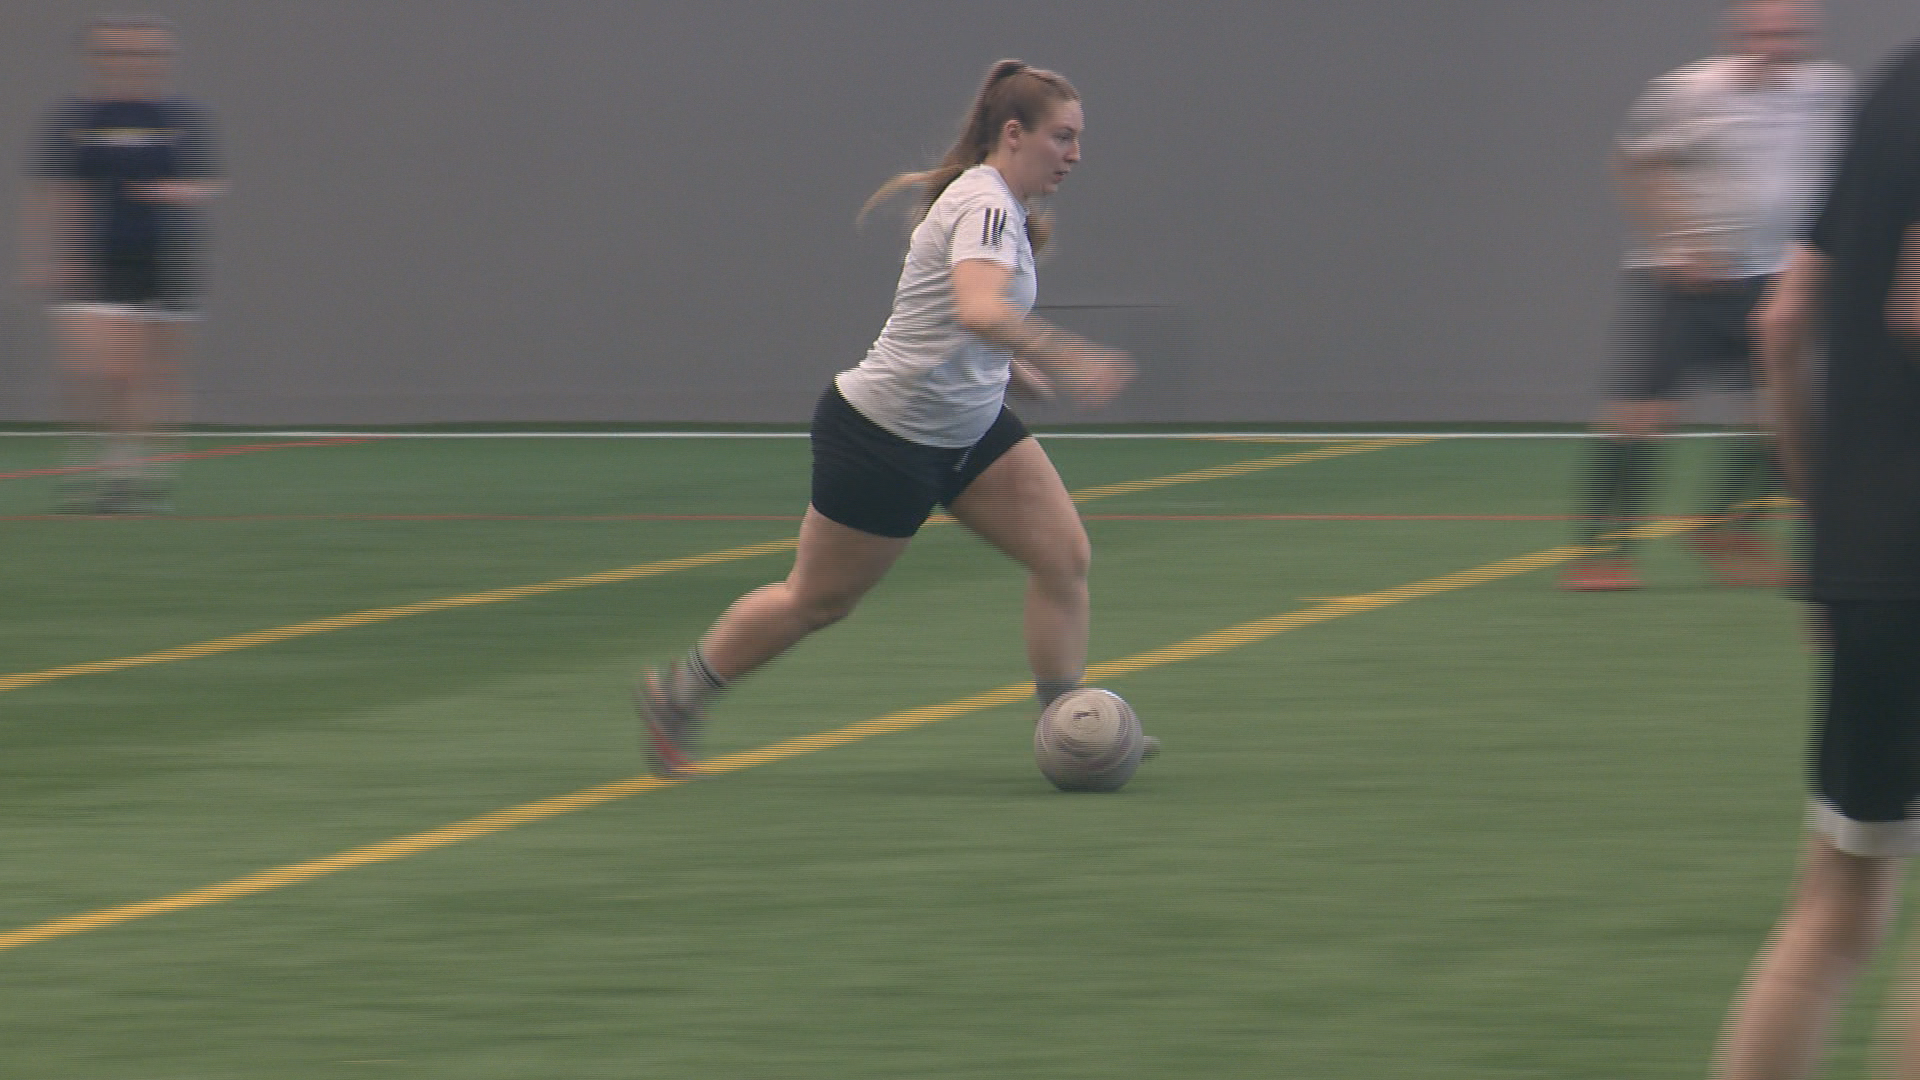 Kicking off in Halifax: Professional women’s soccer league to hit the ground running next year